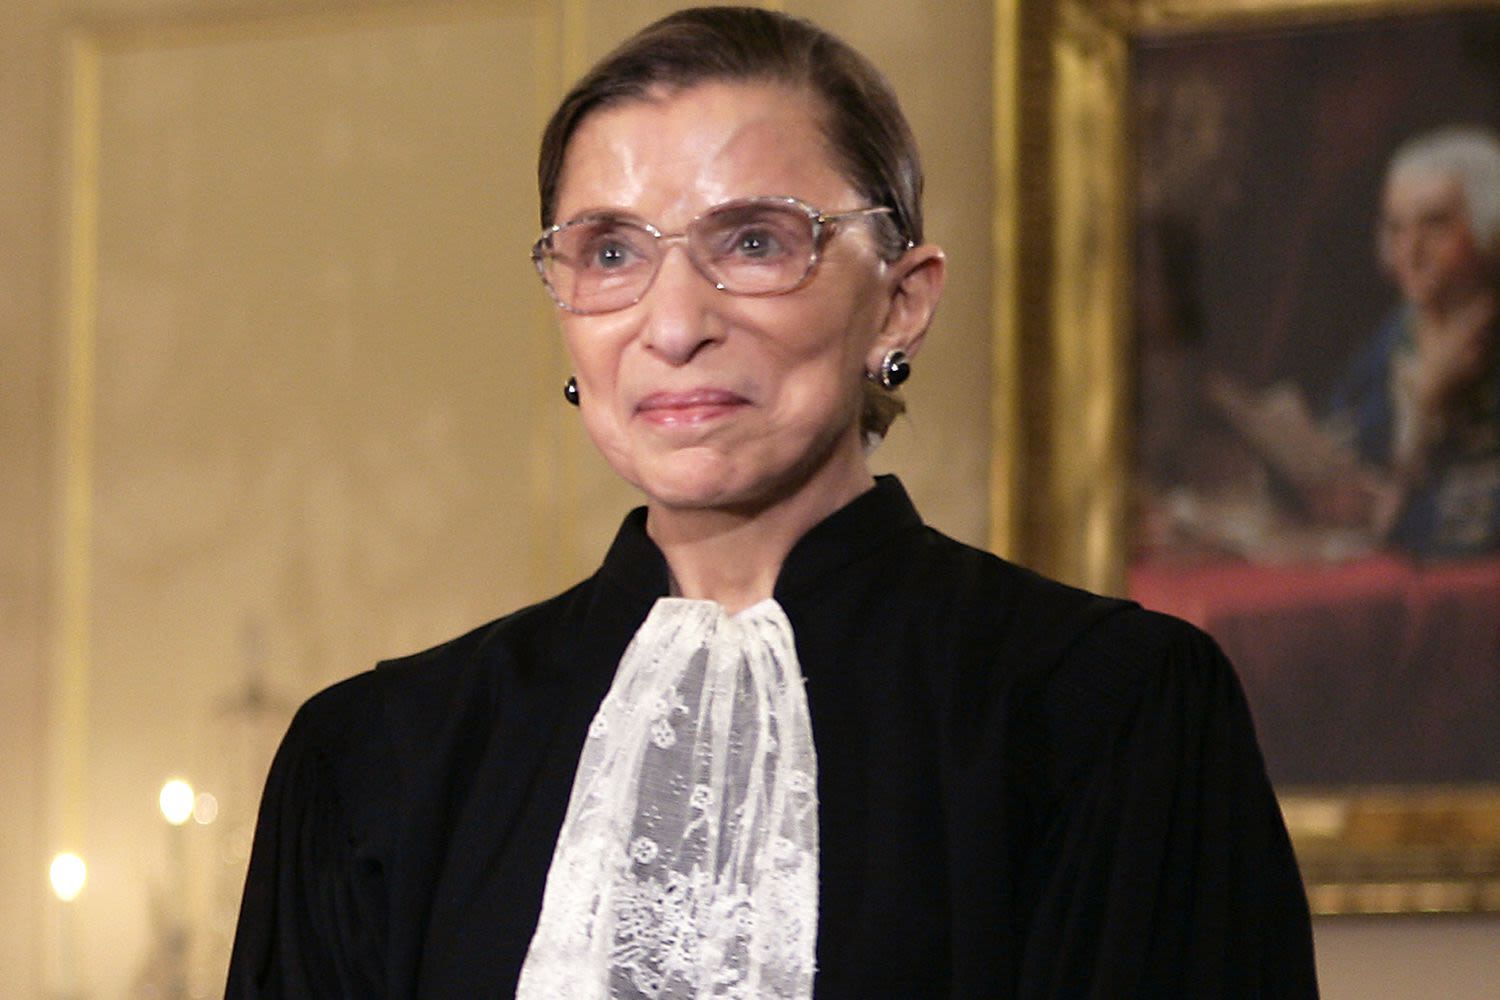 Ruth Bader Ginsburg's 2 Children: All About Jane and James